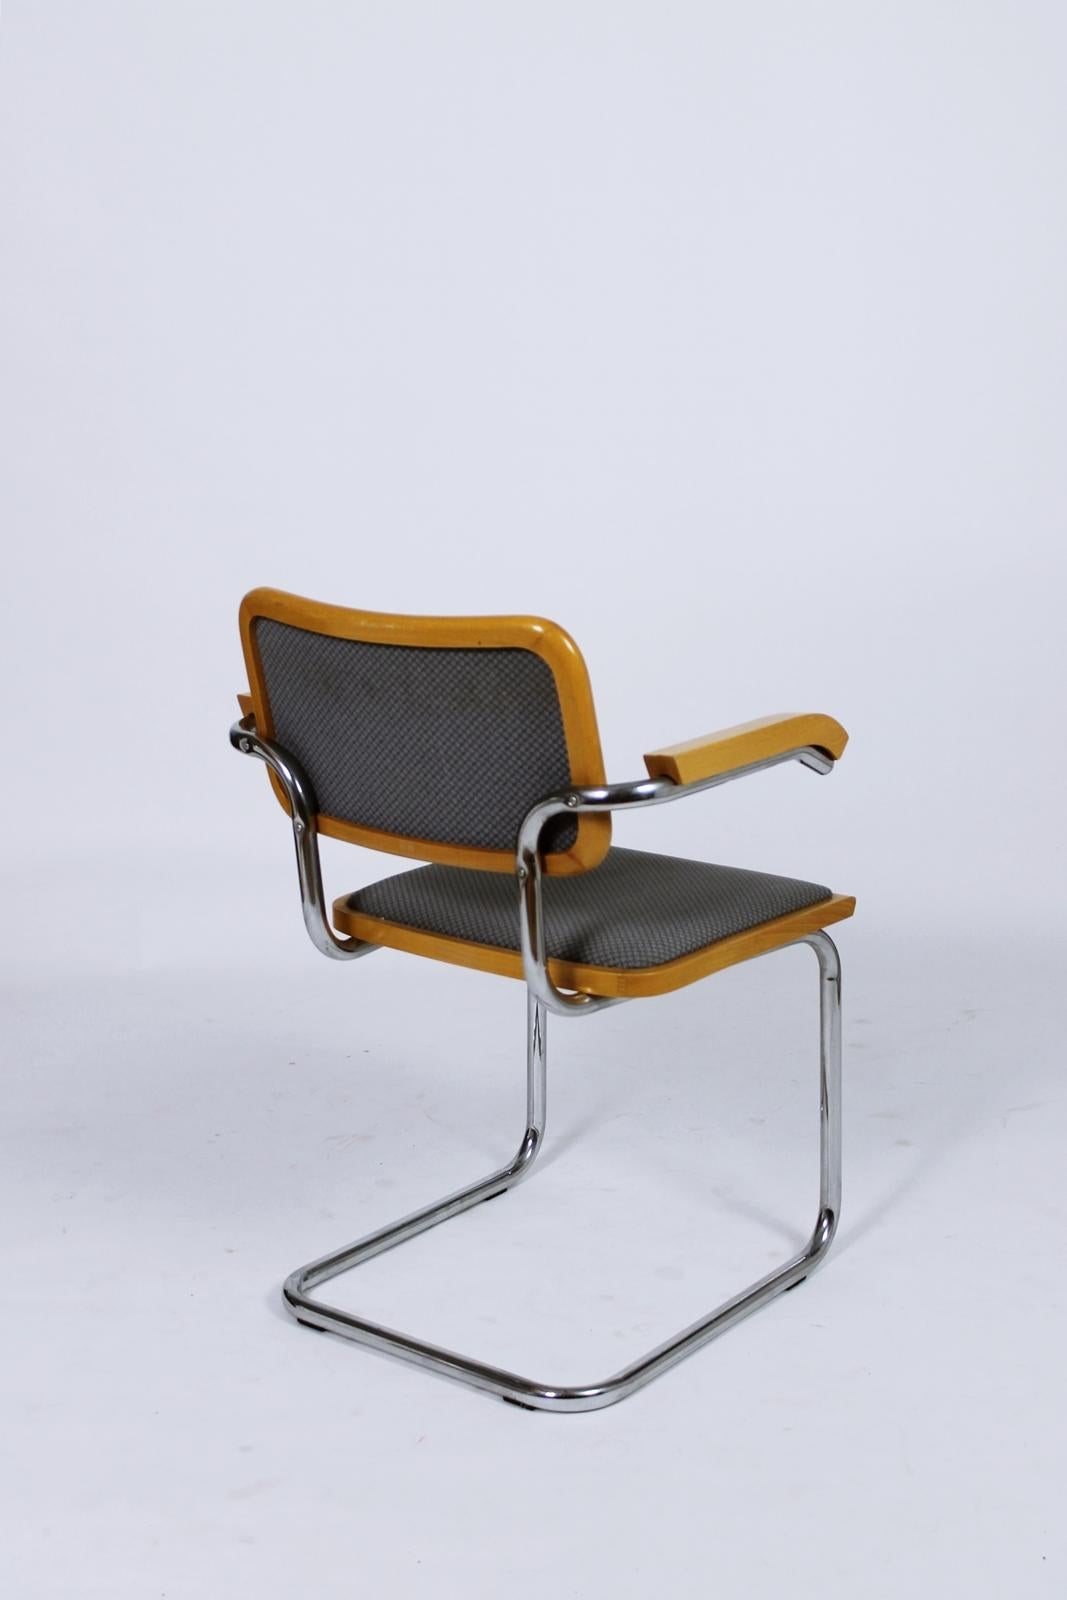 20th Century Pair of Grey Cesca Cantilever Armchairs by Marcel Breuer 1990s Made in Italy For Sale